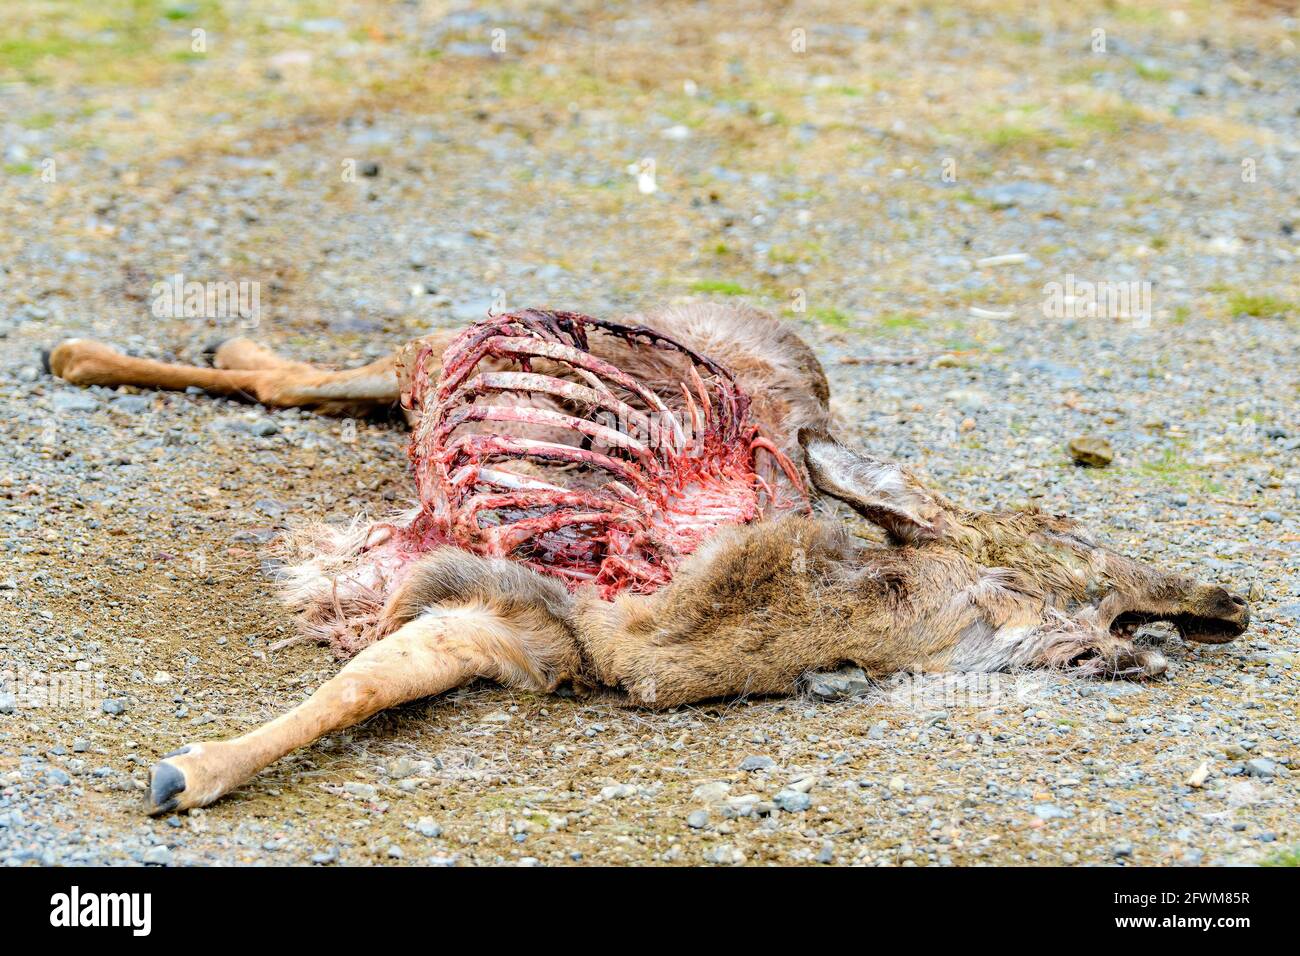 A dead deer carcass lying on an old gravel road. Much of the deer has been eaten, and the ribs are visible. Neck twisted at an angle. Stock Photo